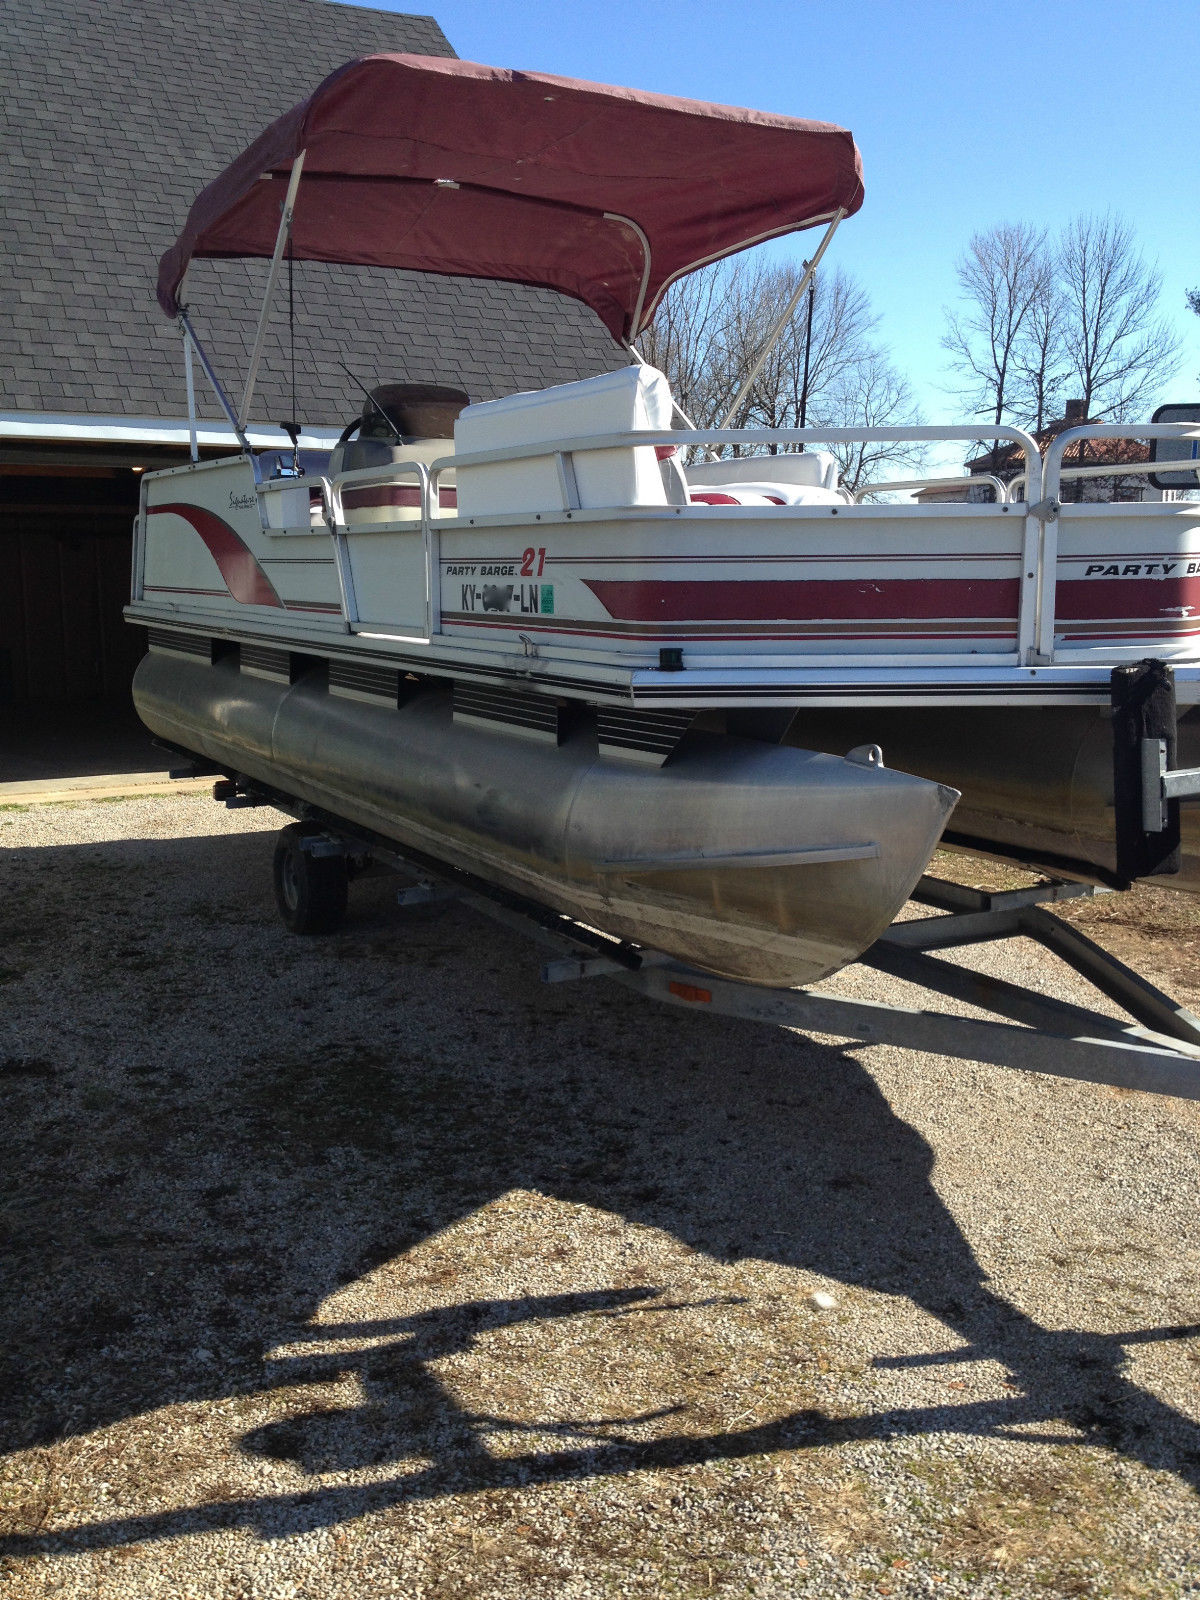 sun tracker pontoon boat 1998 for sale for $6,500 - boats